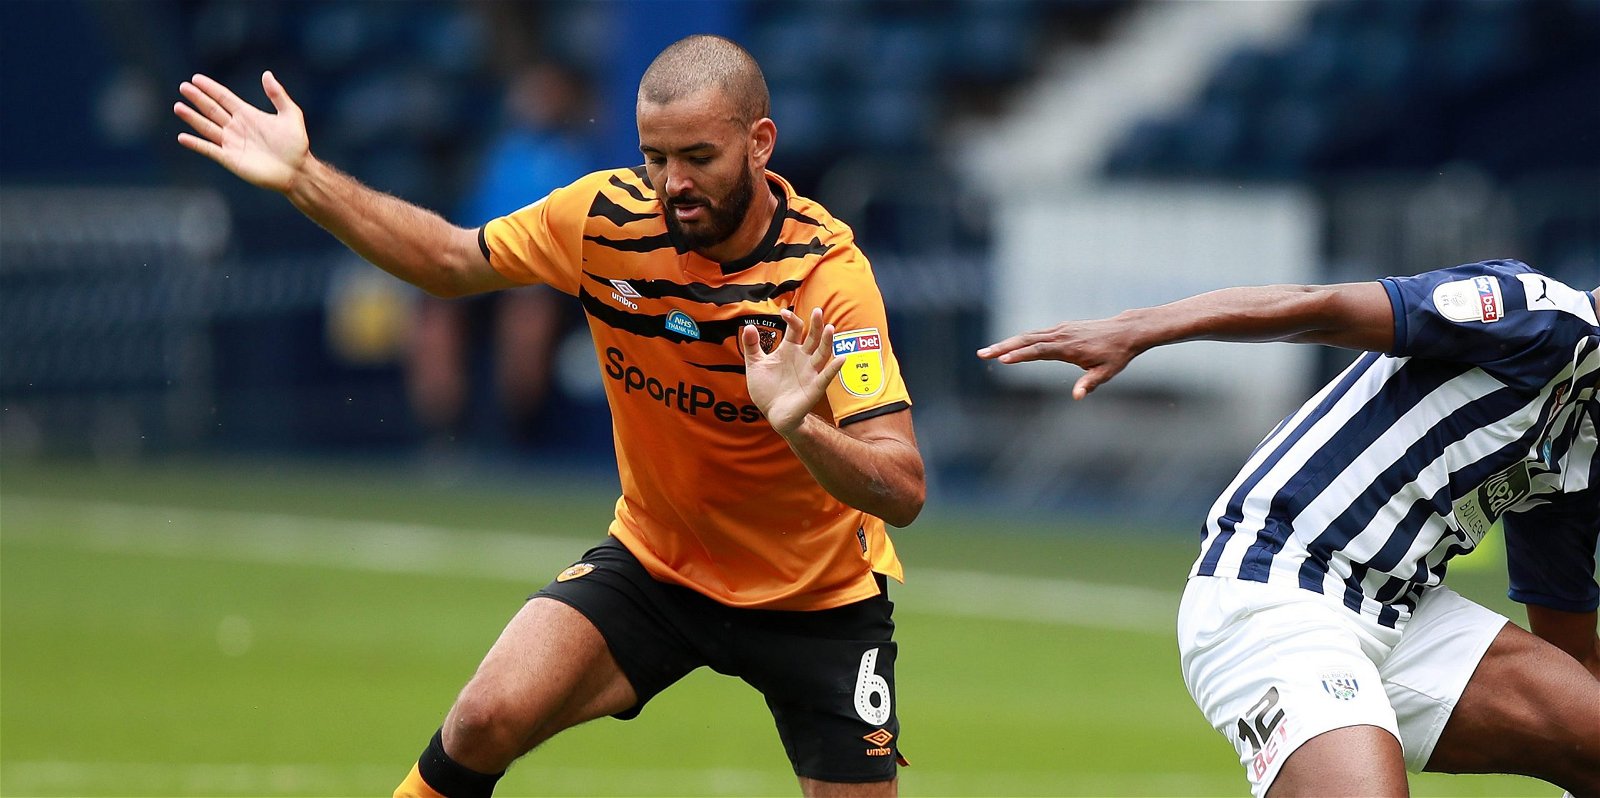 Hull City, Huddersfield Town &#8216;not pursuing&#8217; move for recently released Hull City man